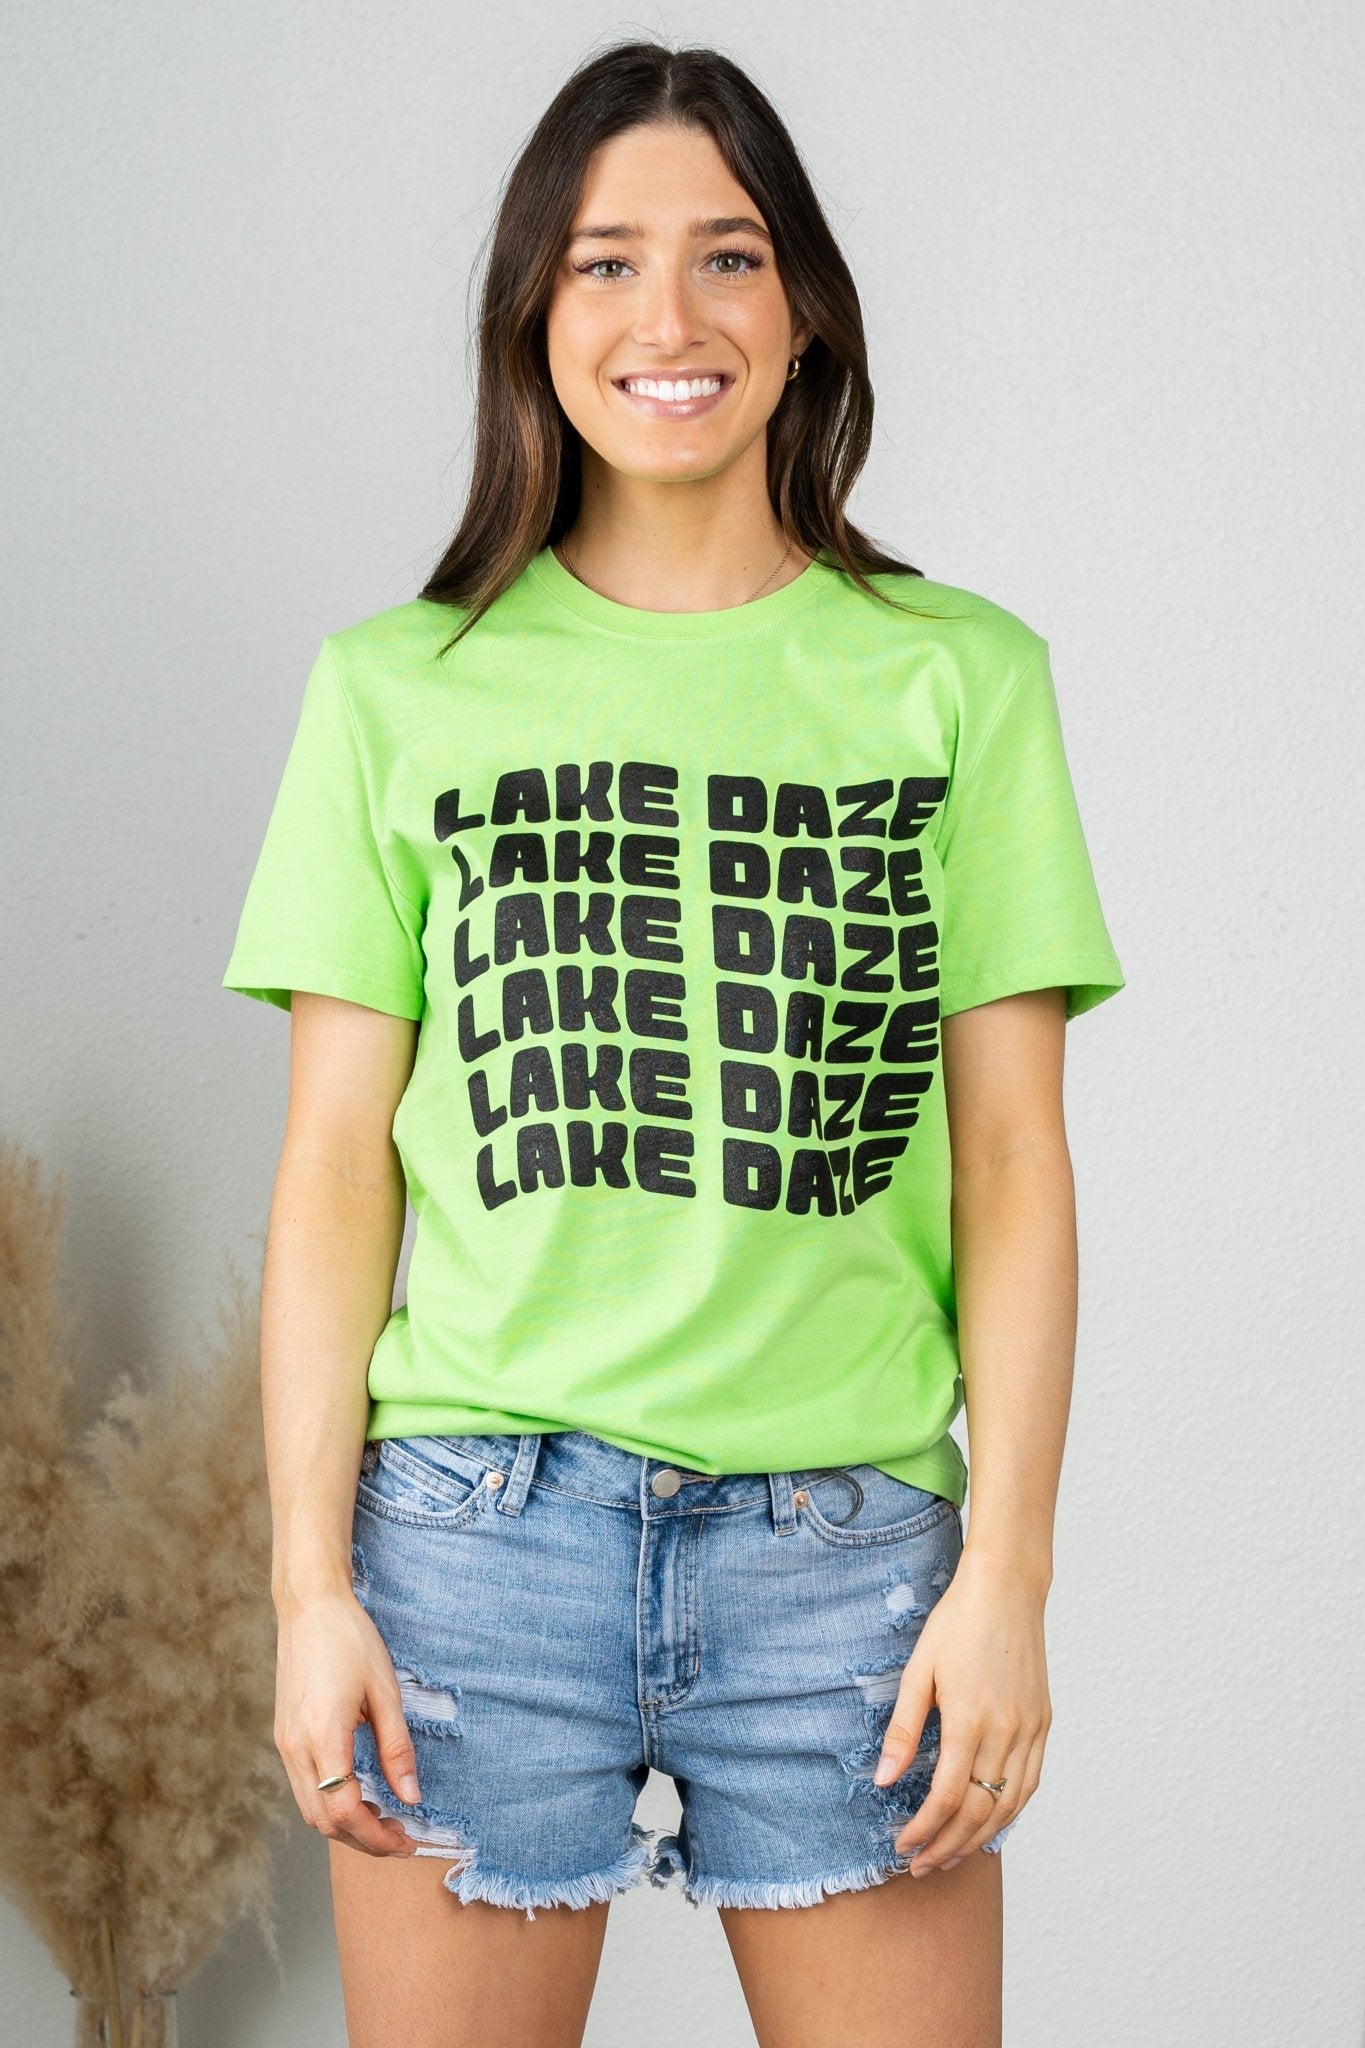 Lake daze repeater dyed t-shirt lime green - DayDreamer Graphic Band Tees at Lush Fashion Lounge Trendy Boutique in Oklahoma City